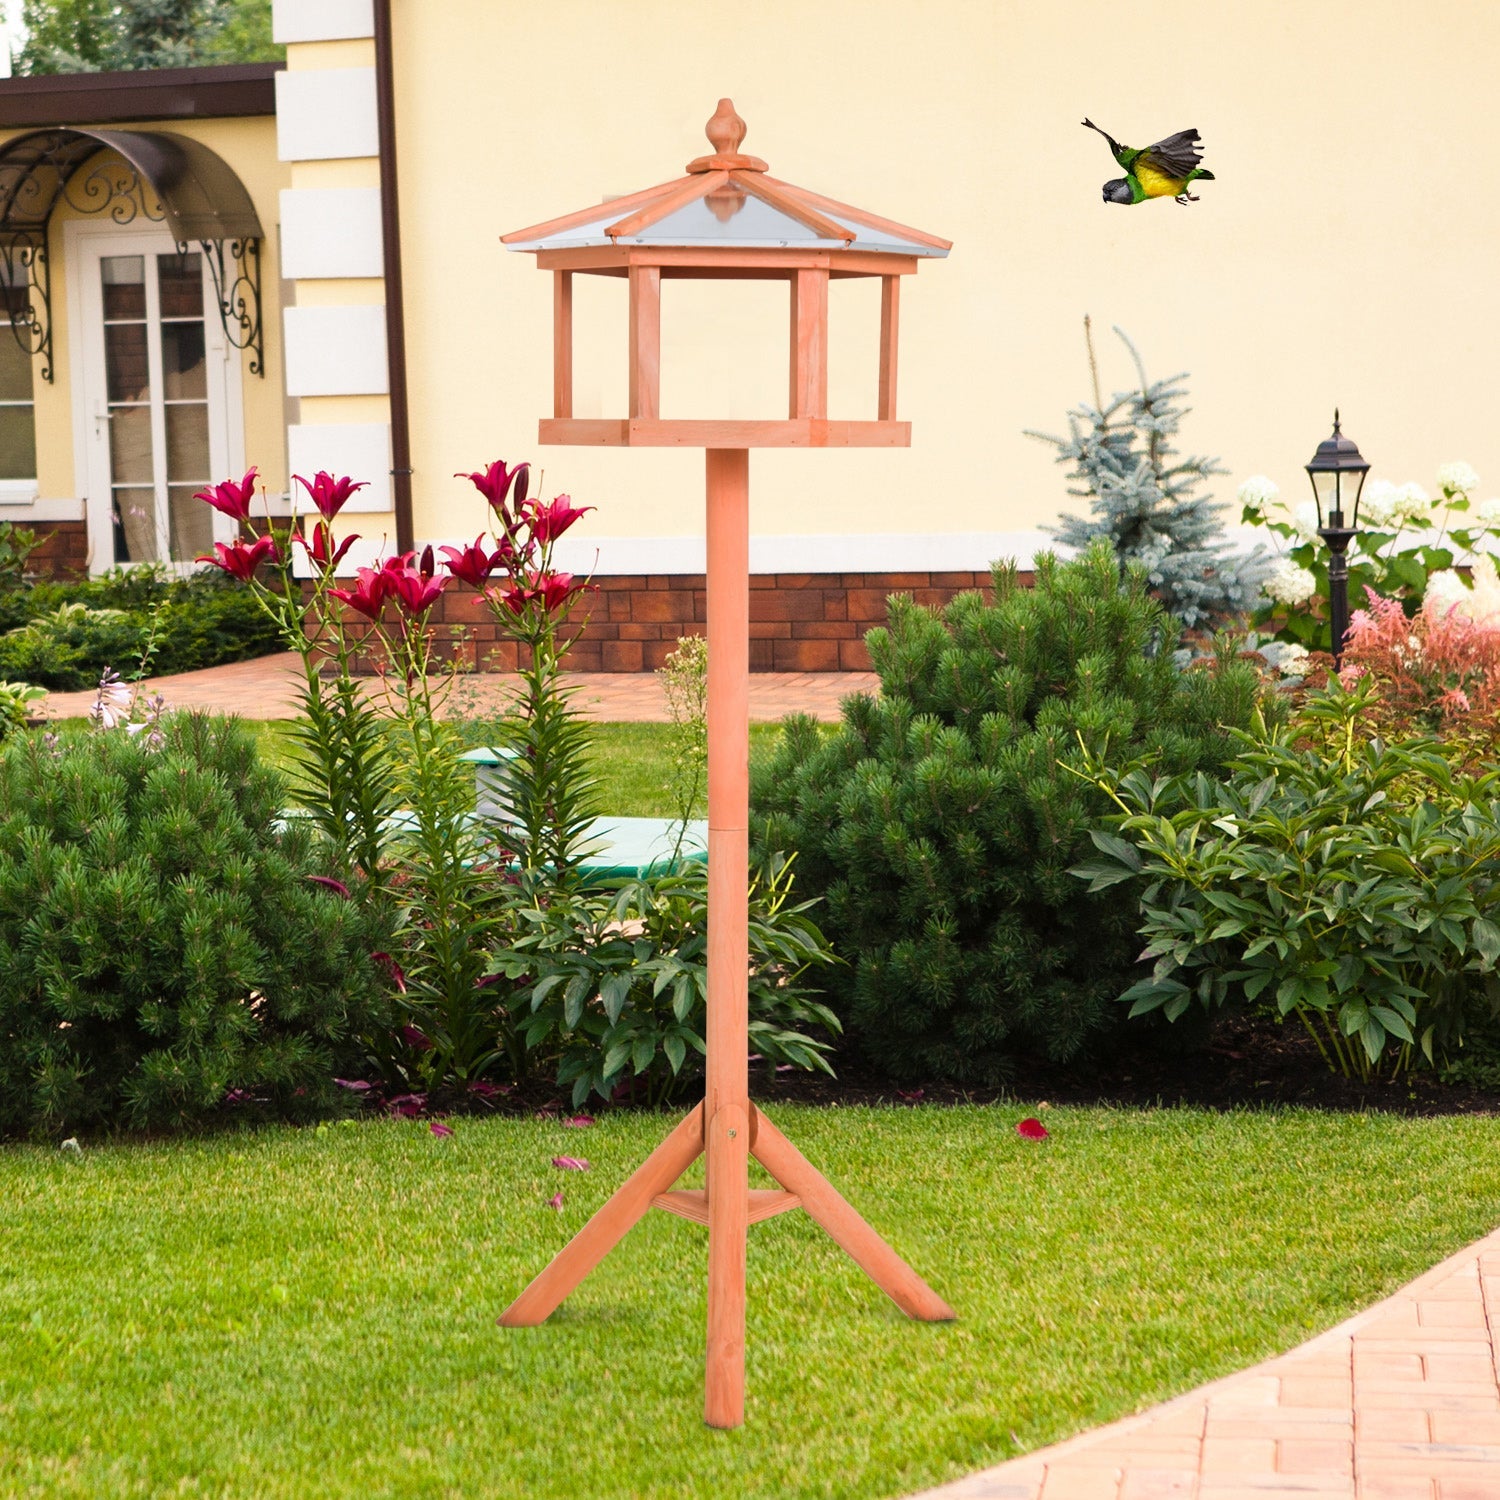 Deluxe Bird Stand Feeder Table Feeding Station Wooden Garden Wood Coop Parrot Stand 113cm High New-1